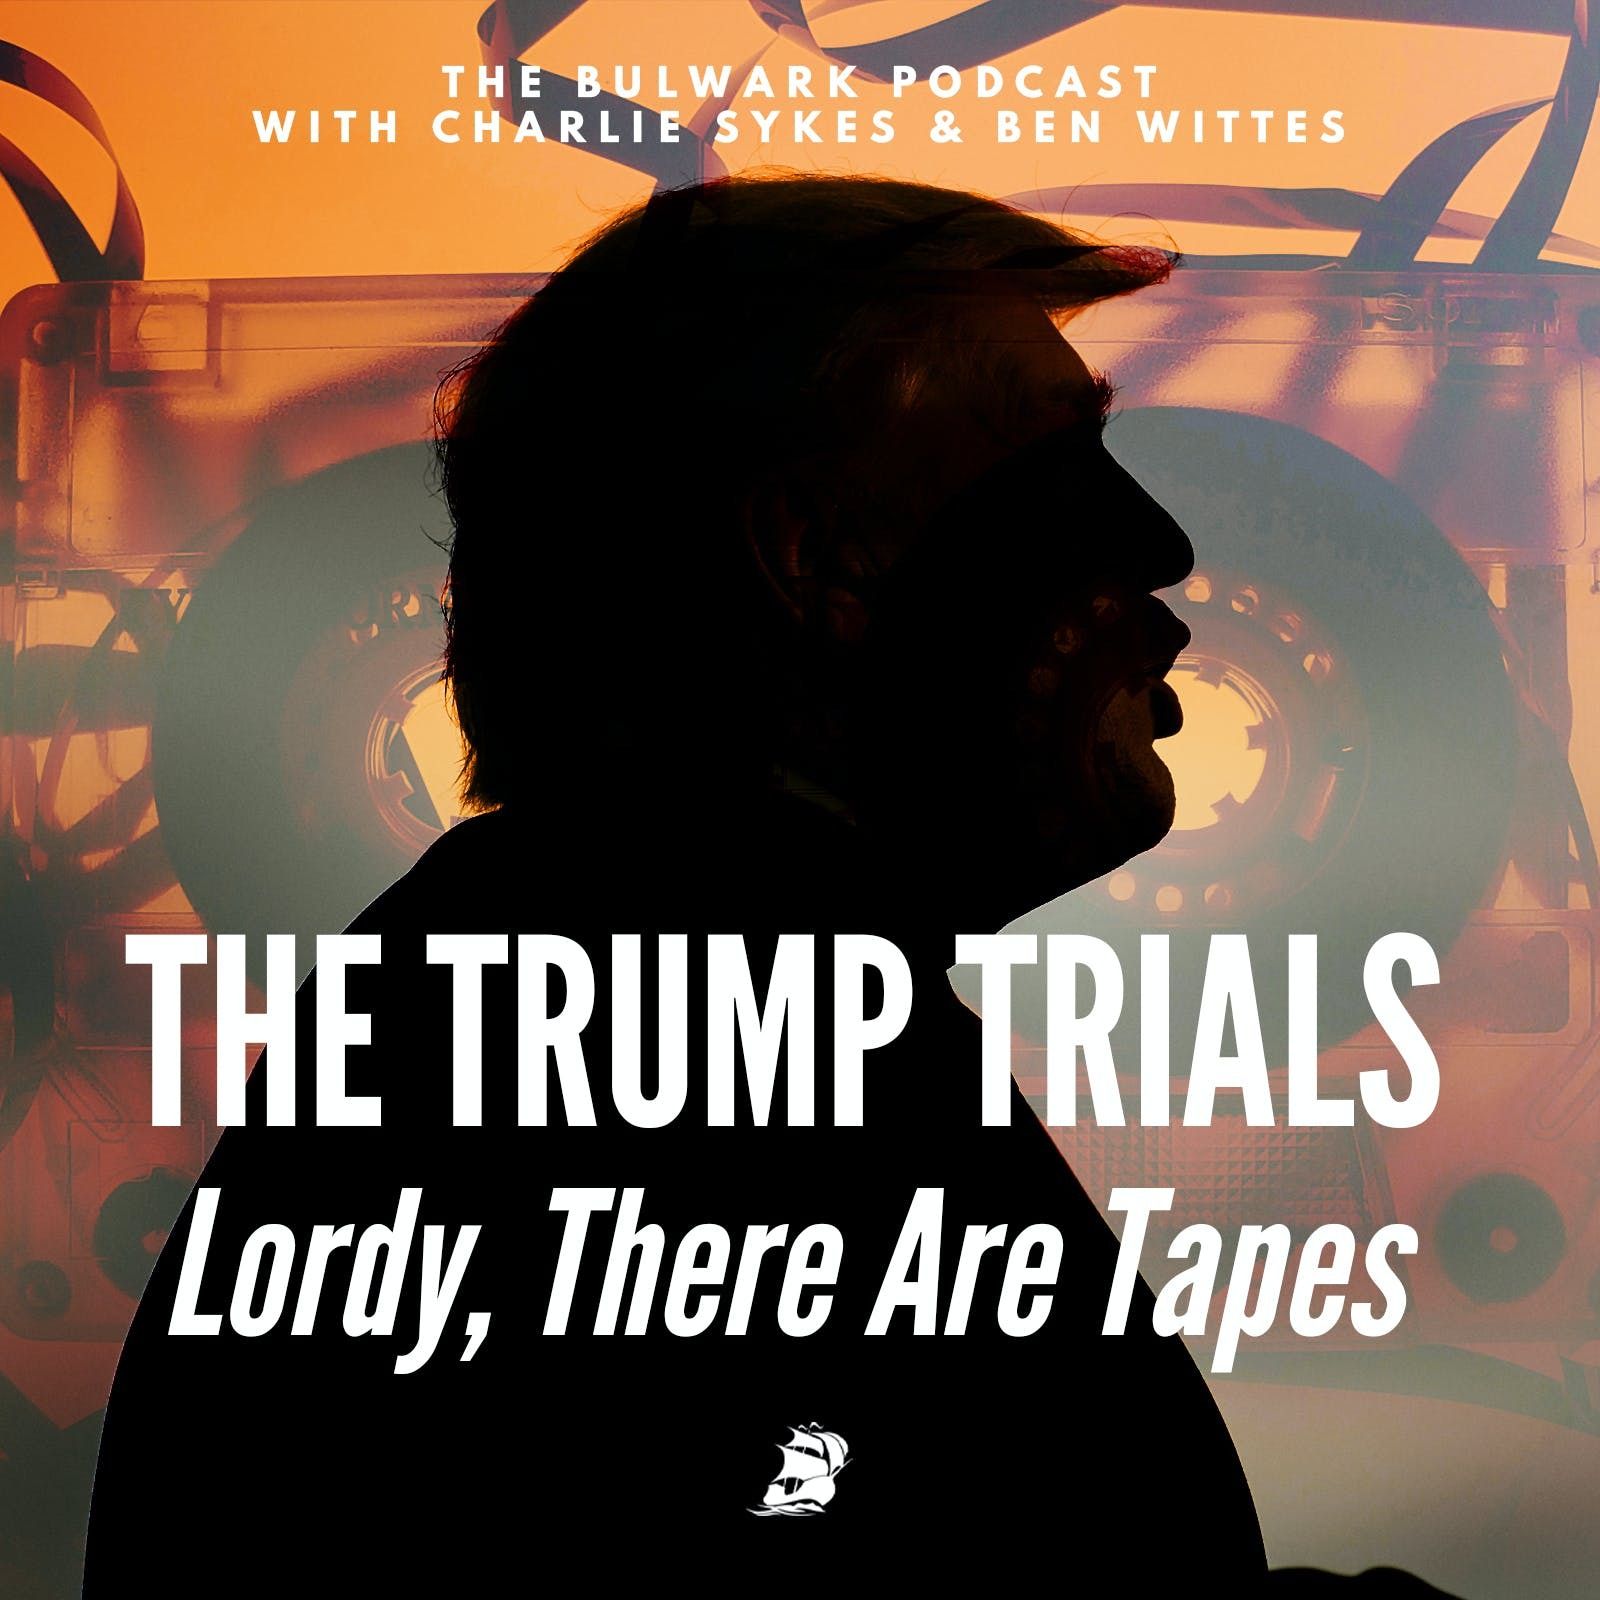 Lordy, There Are Tapes by The Bulwark Podcast